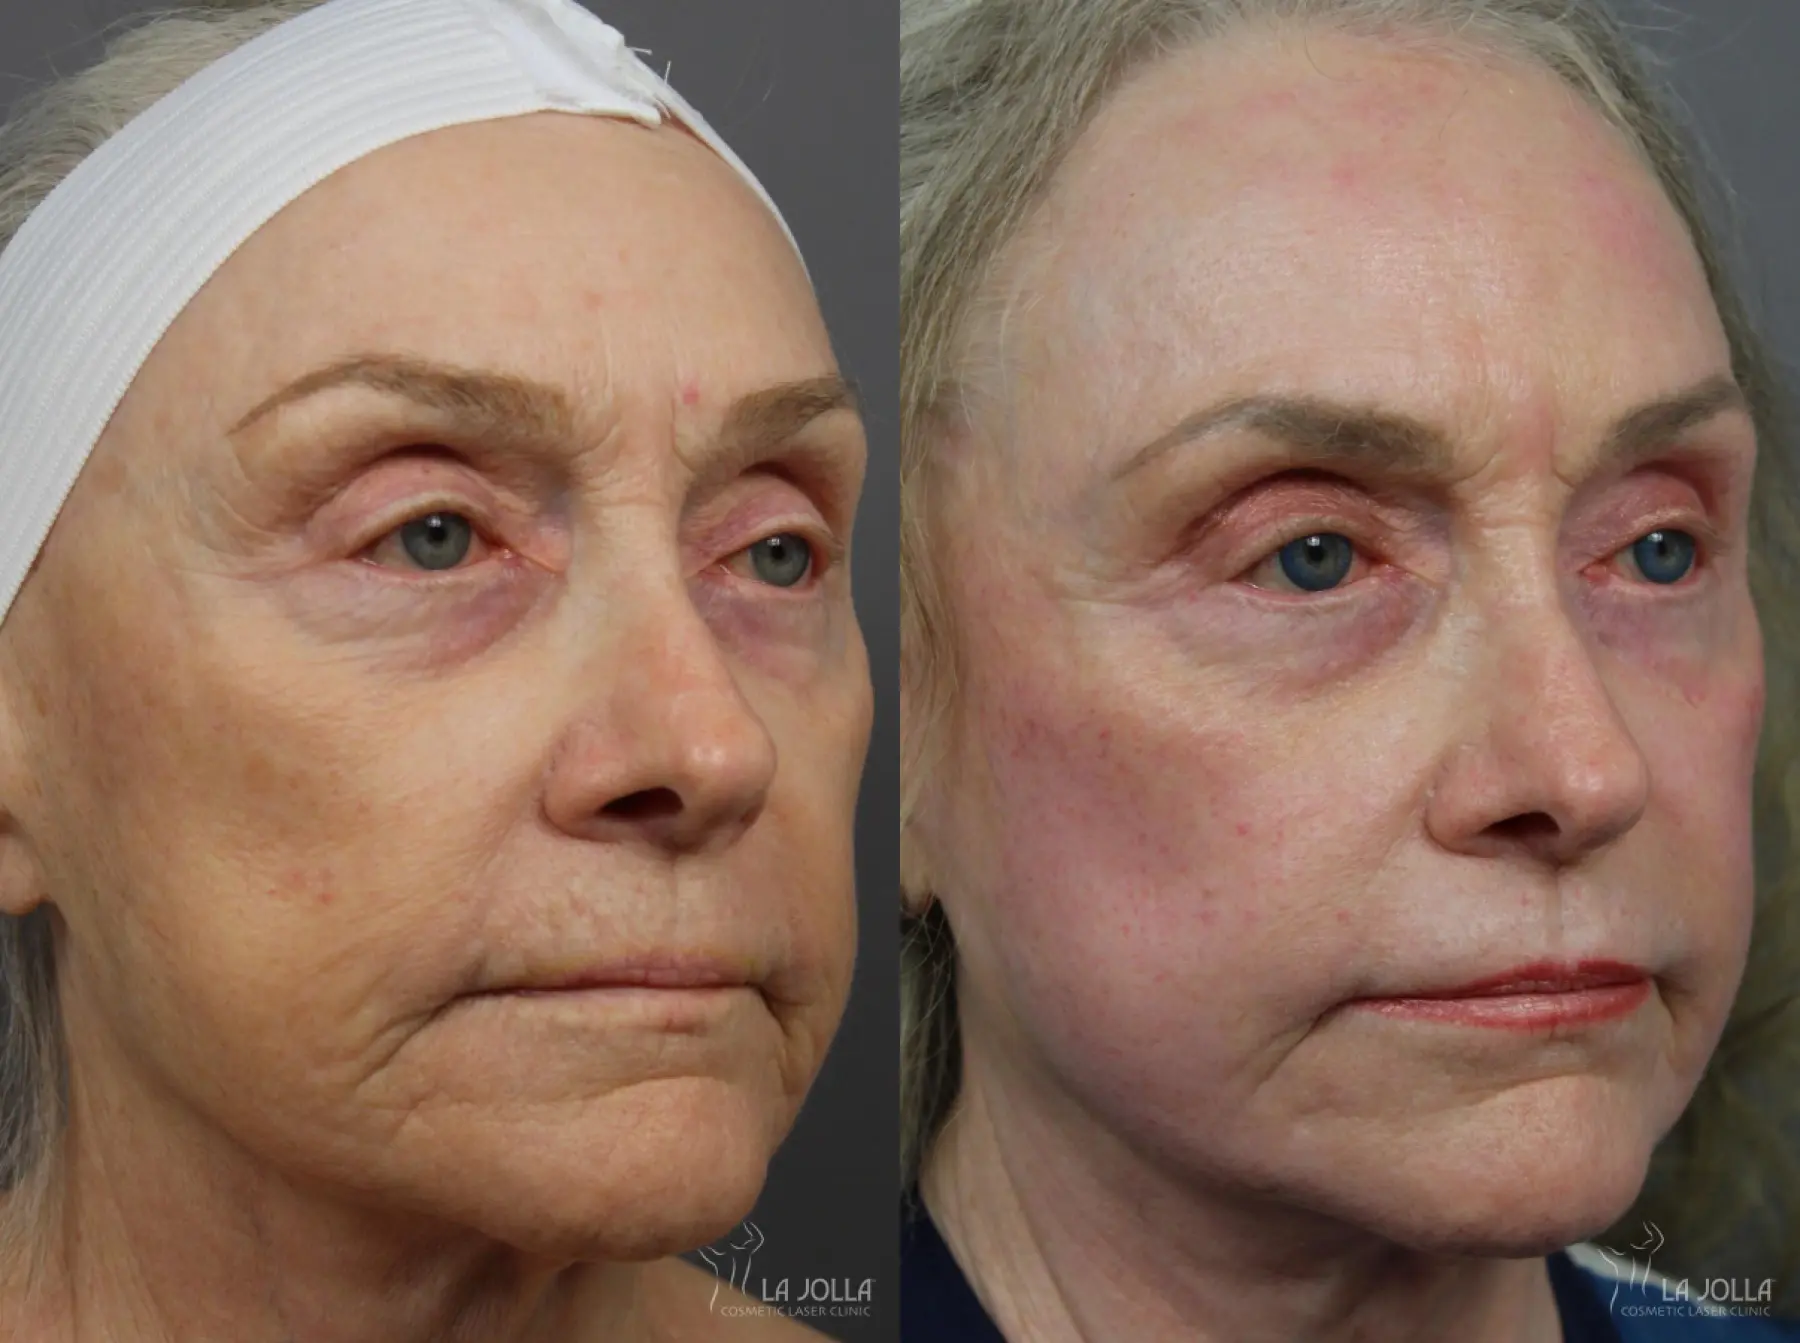 CO2 Laser: Patient 6 - Before and After 1